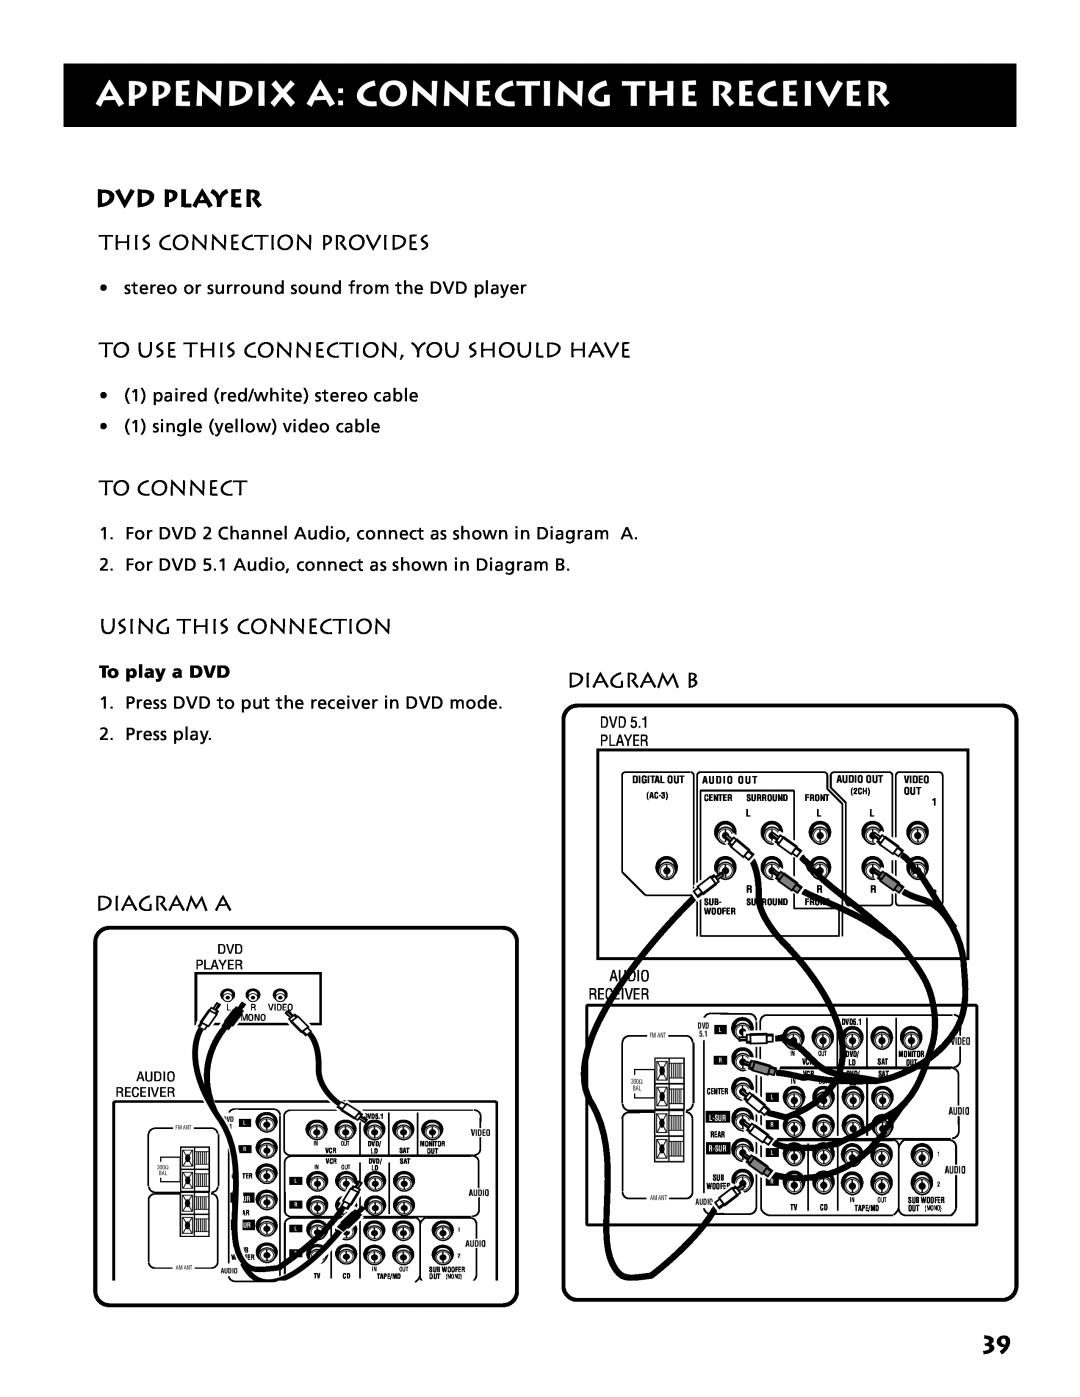 Electrohome RV-3798 Dvd Player, Diagram B, Diagram A, Appendix A: Connecting The Receiver, This Connection Provides, Audio 